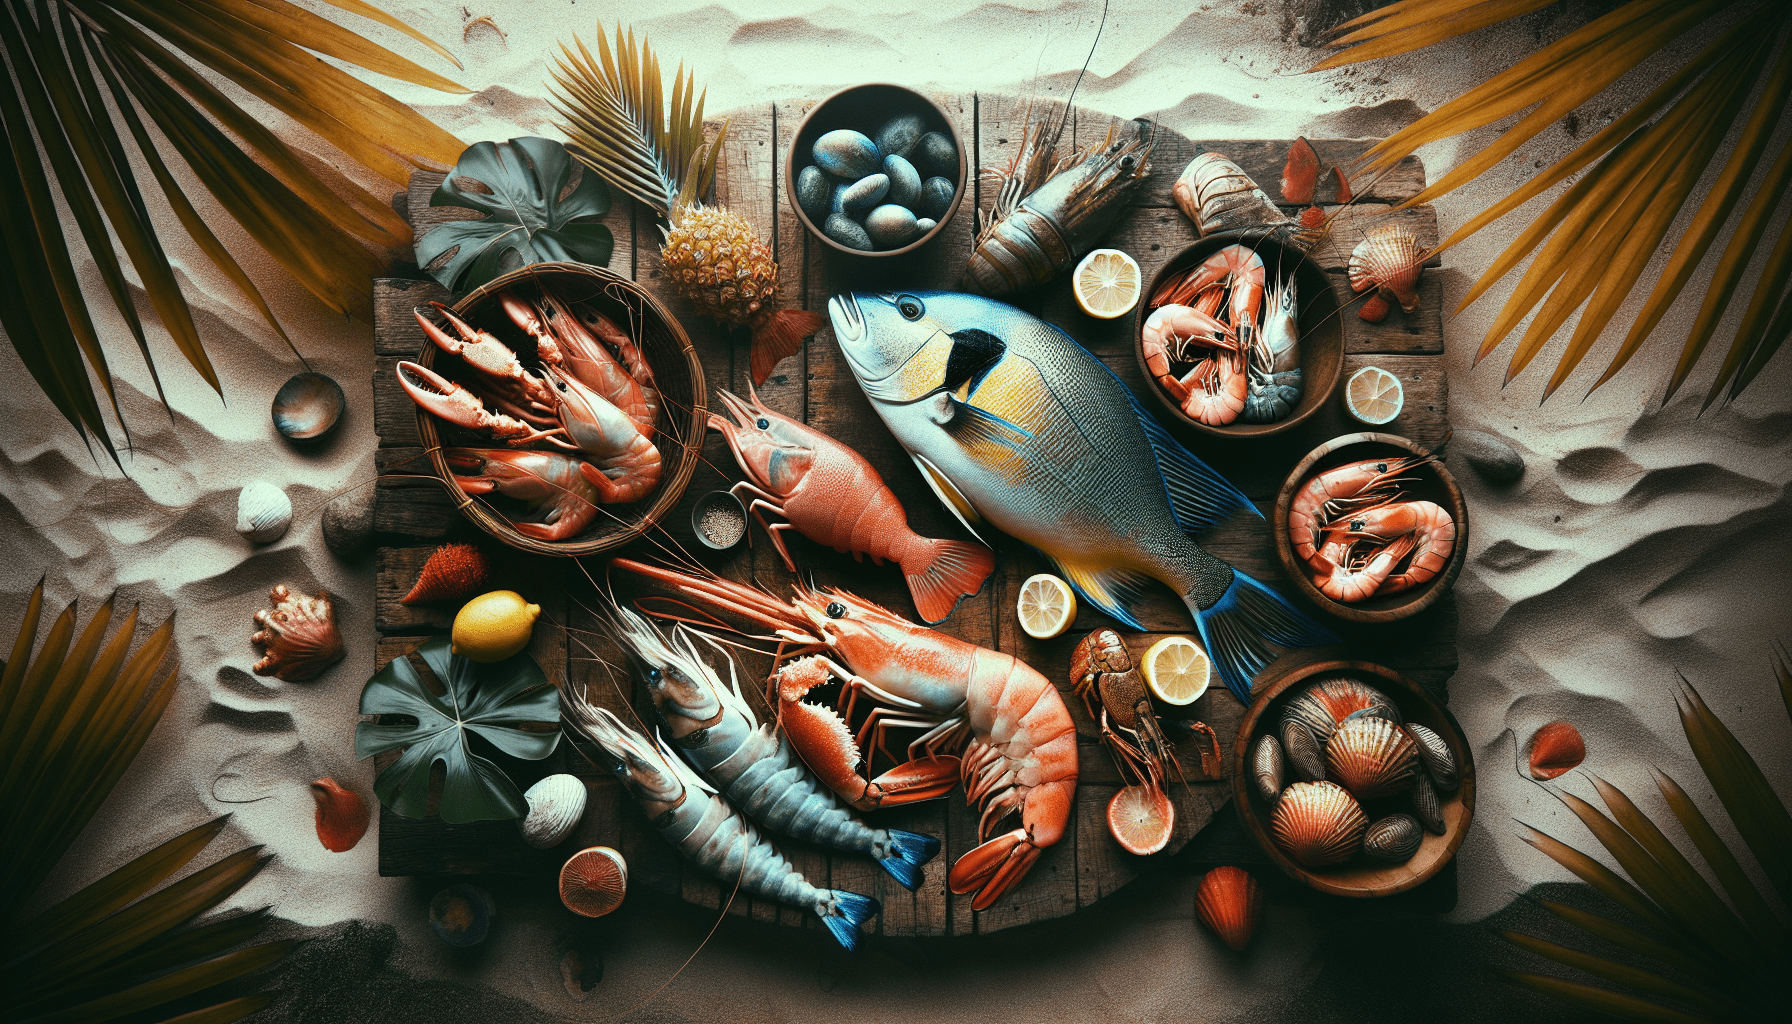 What Are The Nicaraguan Dishes That Showcase The Country’s Connection To The Ocean And Seafood?